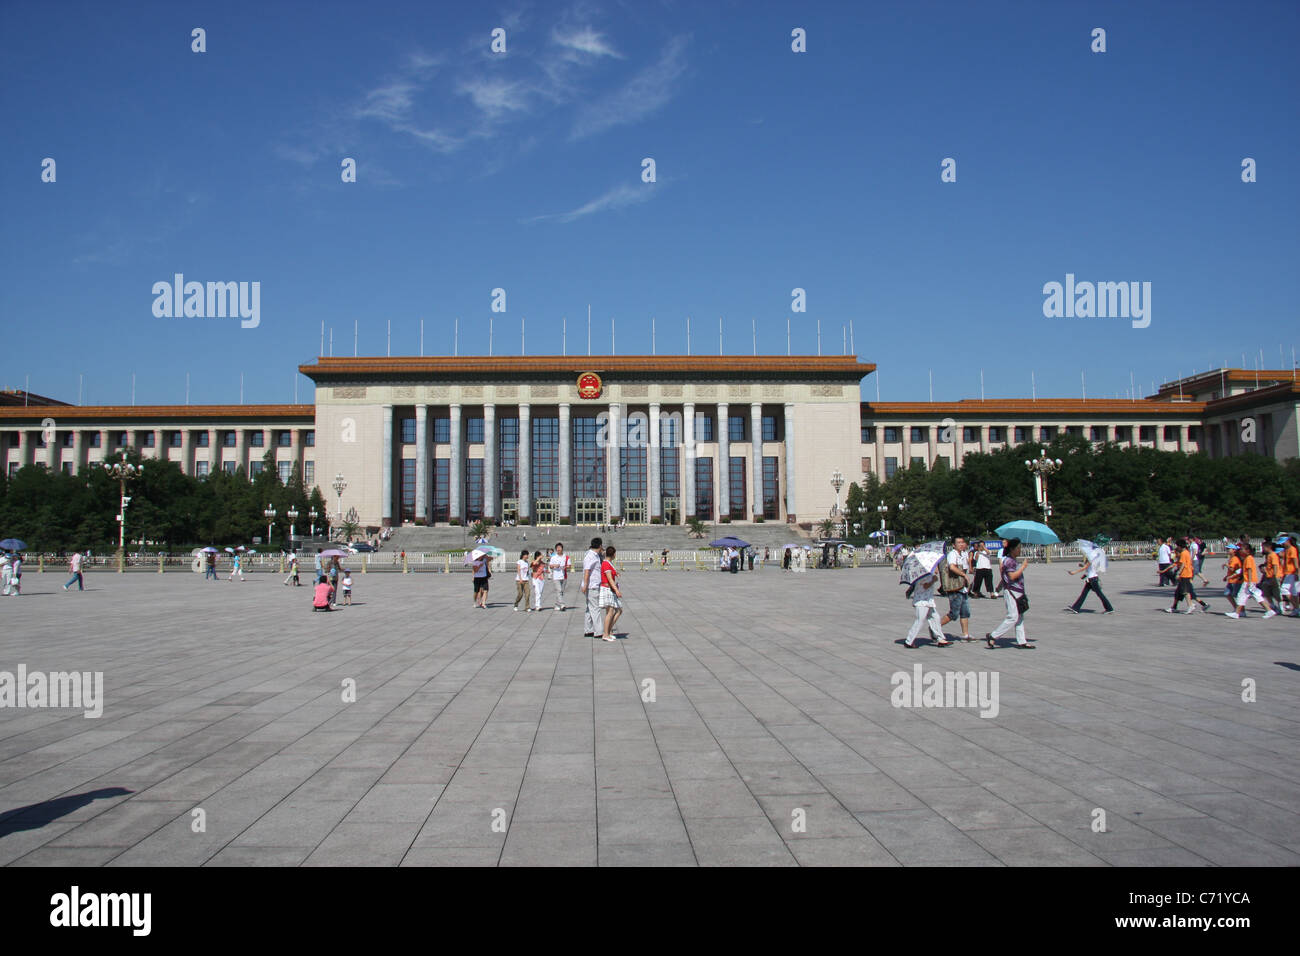 Great Hall of the People (National Assembly Building), Tiananmen Square, Beijing, China. Stock Photo